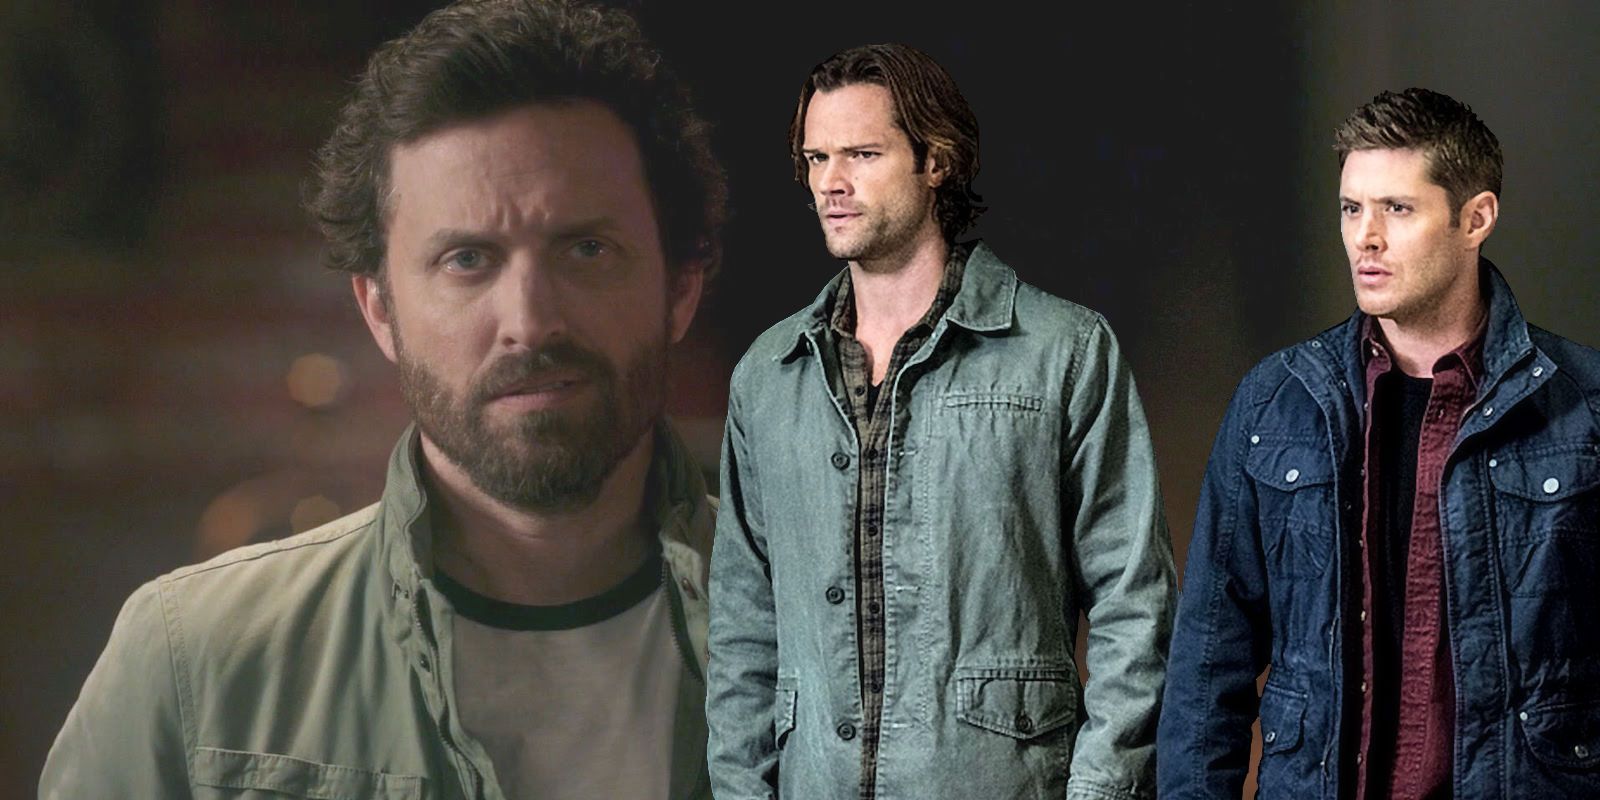 Rob Benedict as God Chuck Jensen Ackles as Dean Winchester and Jared Padalecki as Sam in Supernatural